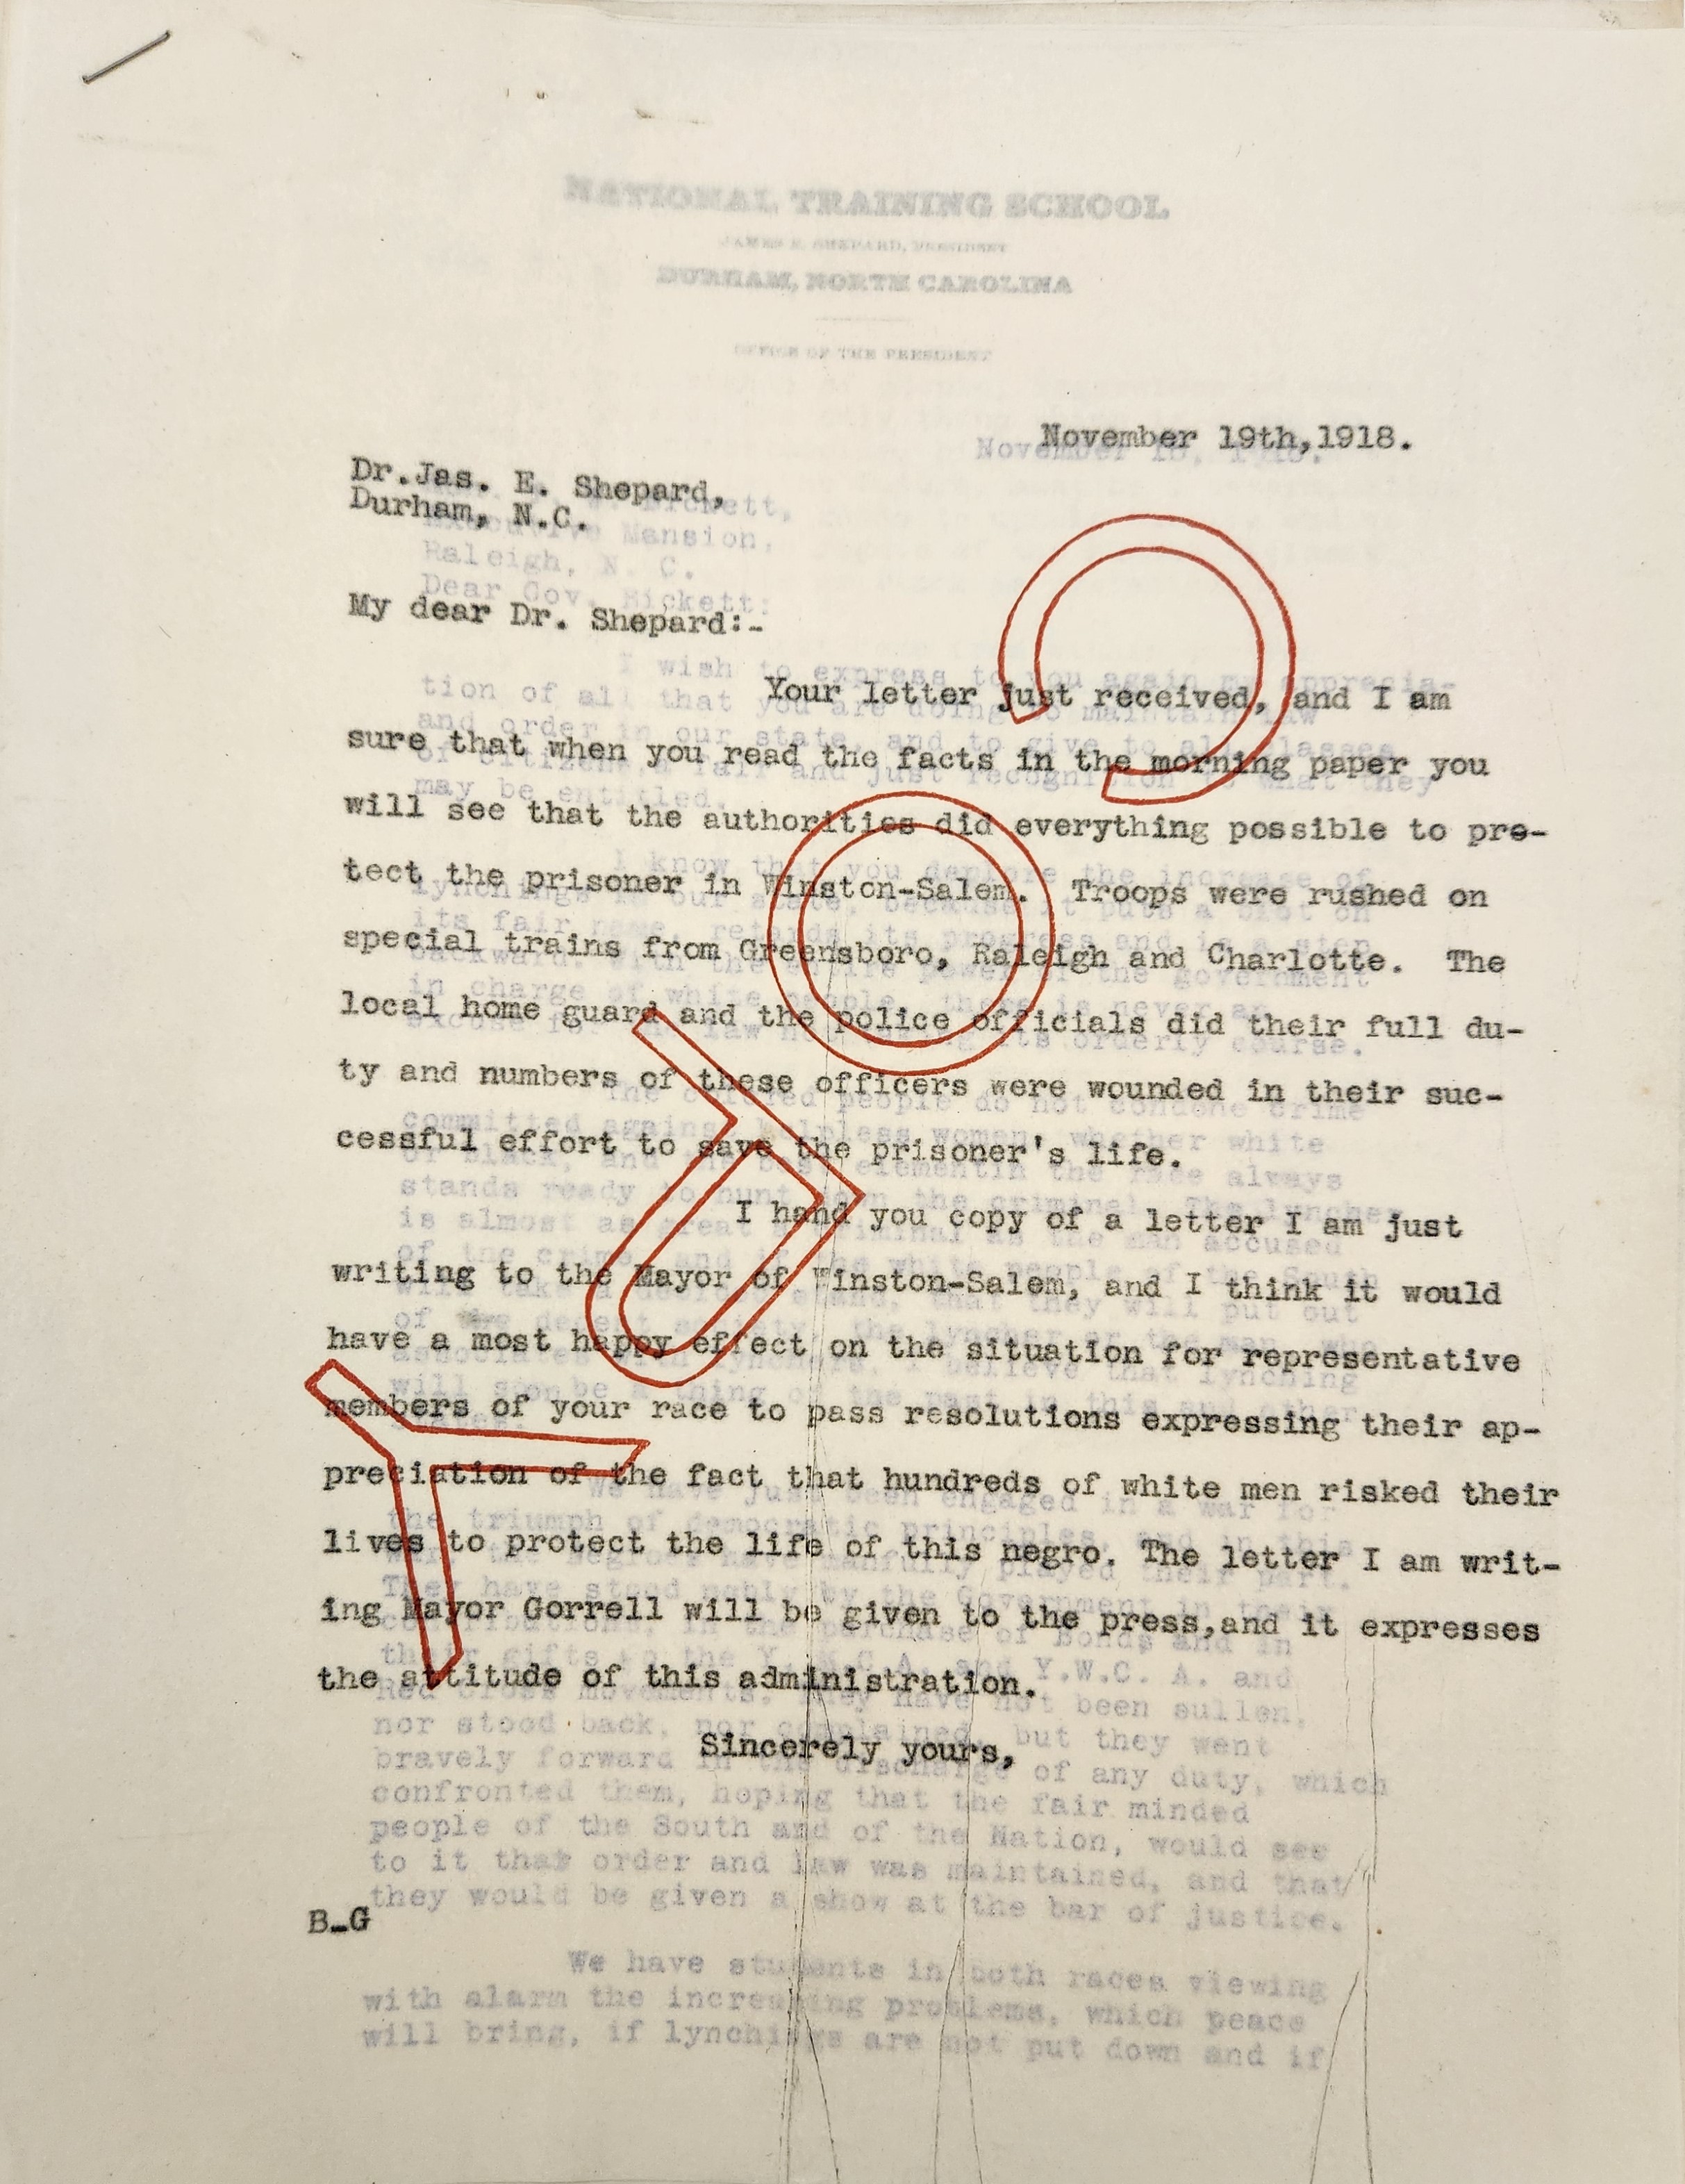 Letter from Bickett to Shepard, November 19, 1918